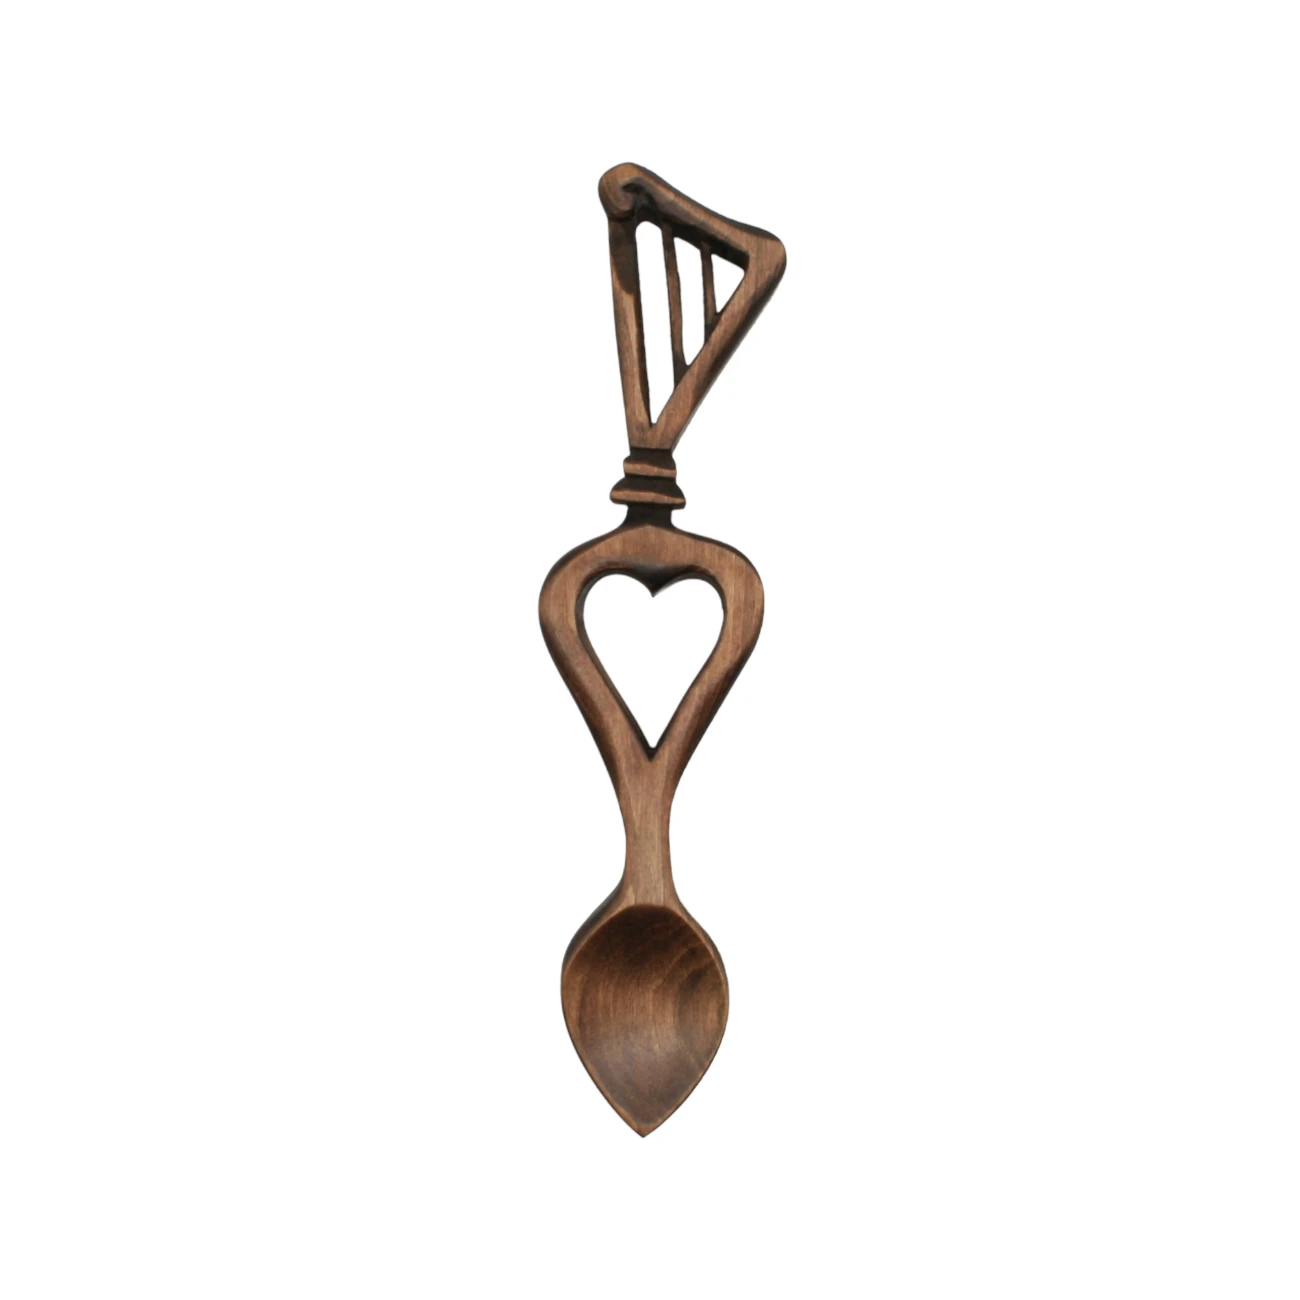 An image of a lovespoon titled Harp & Heart